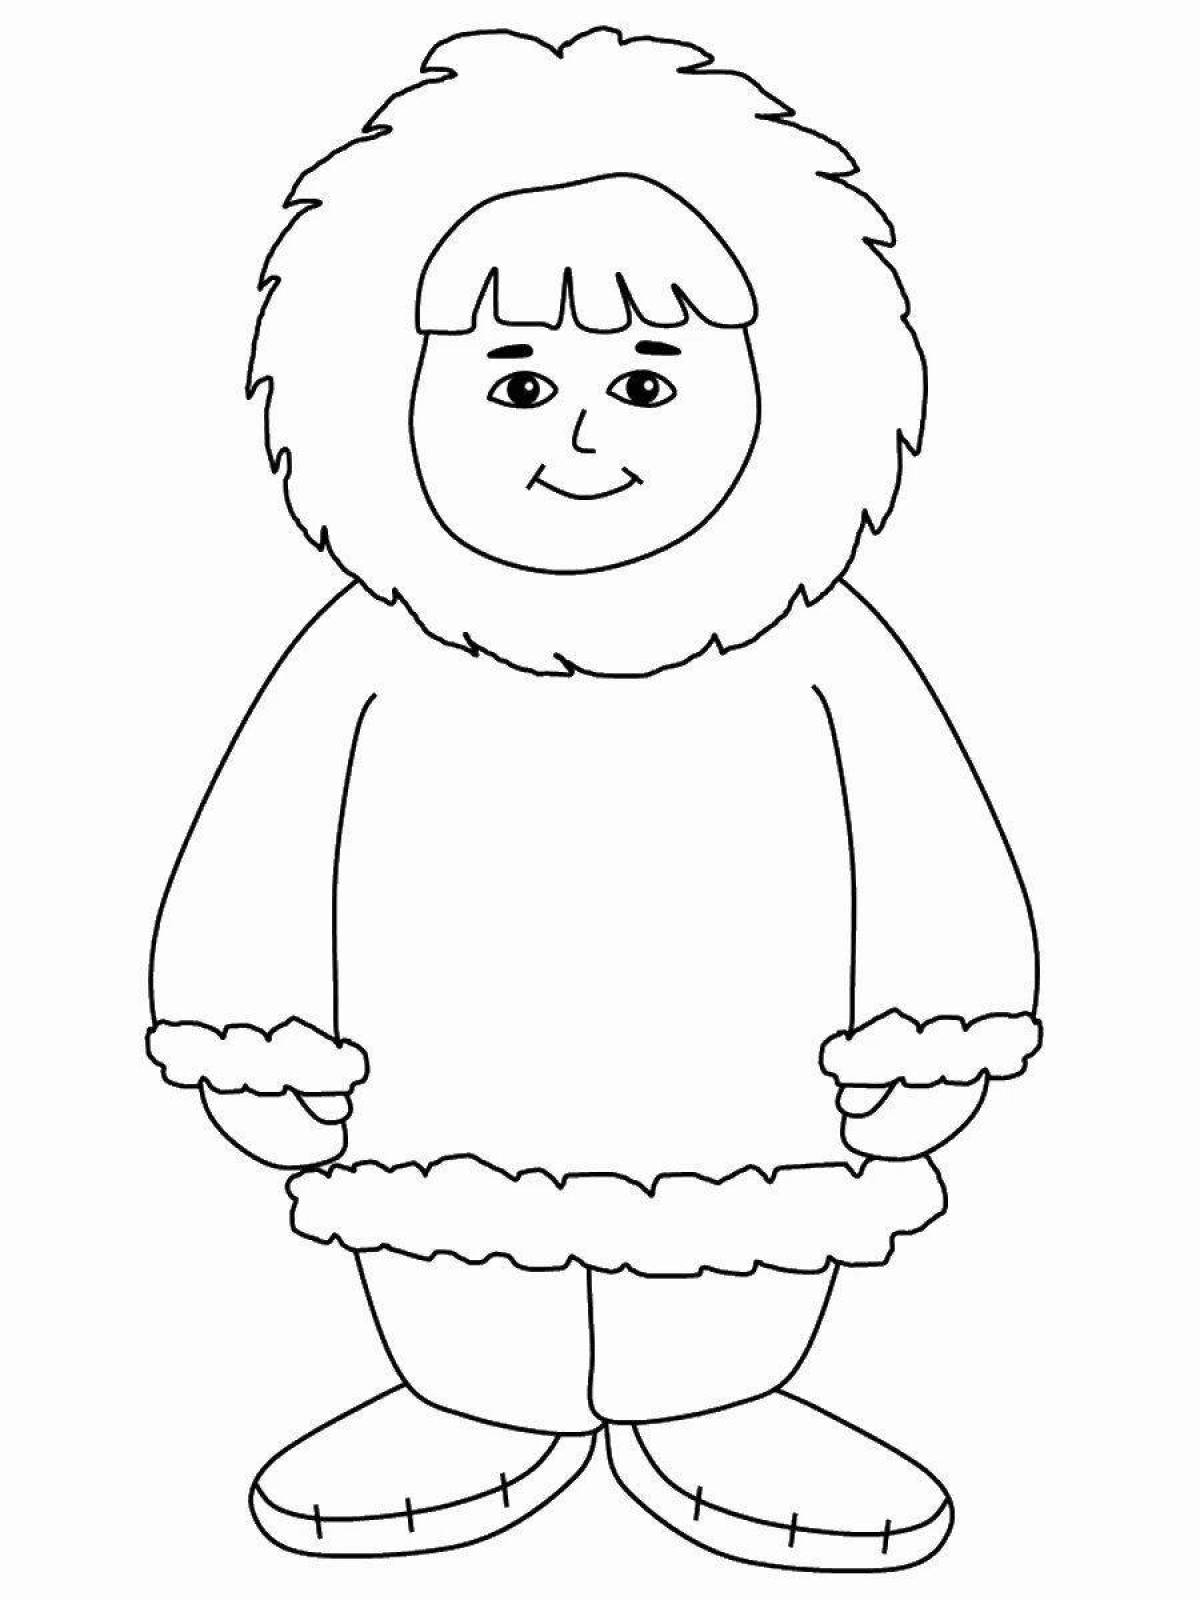 Exciting Sami coloring book for babies